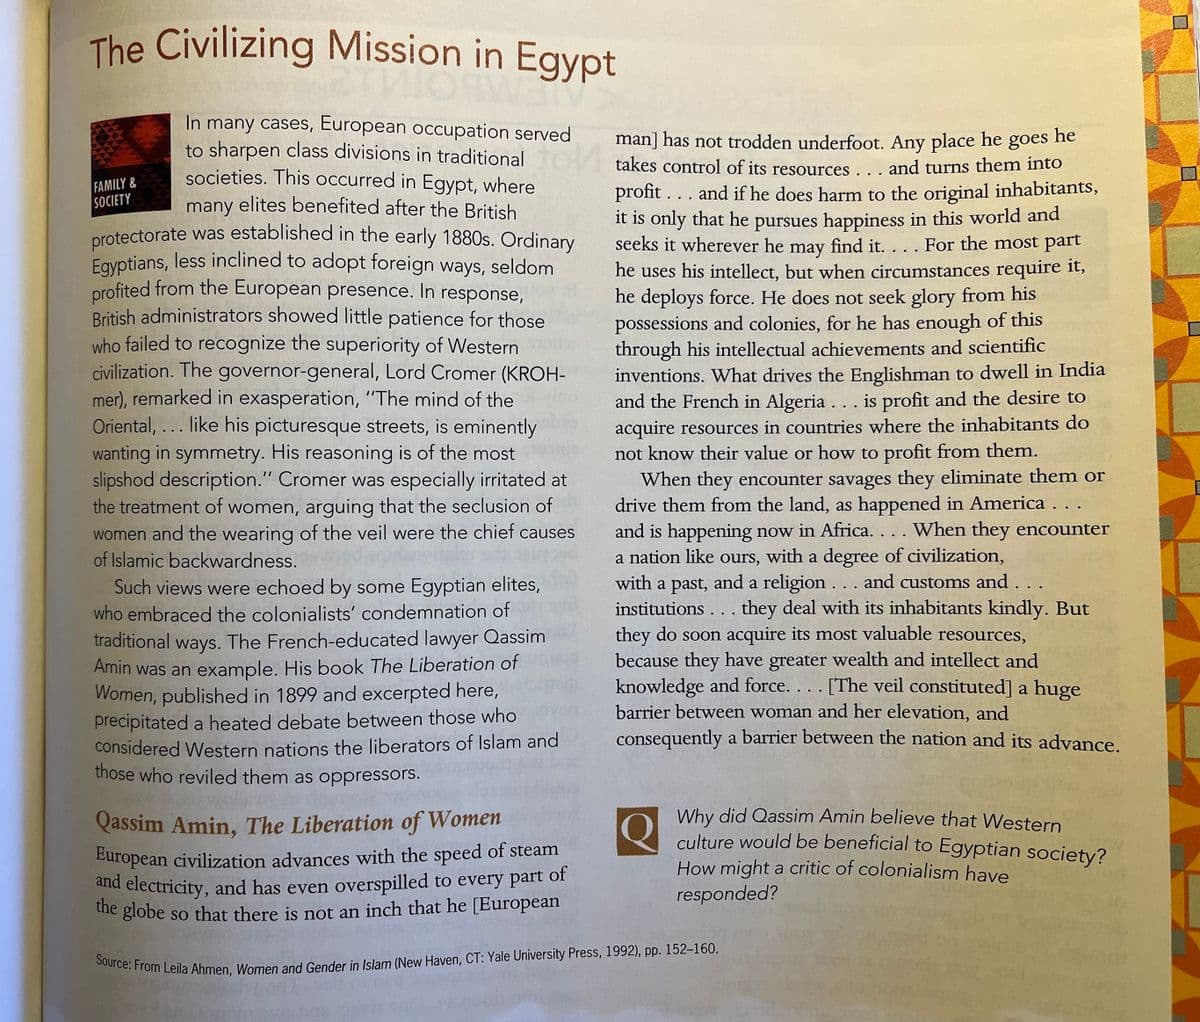 Source: From Leila Ahmen, Women and Gender in Islam (New Haven, CT: Yale University Press, 1992), pp. 152-160.
European civilization advances with the speed of steam
The Civilizing Mission in Egypt
In many cases, European occupation served
to sharpen class divisions in traditional
societies. This occurred in Egypt, where
many elites benefited after the British
protectorate was established in the early 1880s. Ordinary
Eayptians, less inclined to adopt foreign ways, seldom
profited from the European presence. In response,
British administrators showed little patience for those
who failed to recognize the superiority of Western
civilization. The governor-general, Lord Cromer (KROH-
mer), remarked in exasperation, "The mind of the
Oriental, ... like his picturesque streets, is eminently
he
man] has not trodden underfoot. Any place he goes
takes control of its resources . . . and turns them into
FAMILY&
SOCIETY
profit ... and if he does harm to the original inhabitants,
it is only that he pursues happiness in this world and
seeks it wherever he may find it. . . . For the most part
he uses his intellect, but when circumstances require it,
he deploys force. He does not seek glory from his
possessions and colonies, for he has enough of this
through his intellectual achievements and scientific
inventions. What drives the Englishman to dwell in India
and the French in Algeria ... is profit and the desire to
acquire resources in countries where the inhabitants do
not know their value or hw to profit from them.
wanting in symmetry. His reasoning is of the most
slipshod description." Cromer was especially irritated at
the treatment of women, arguing that the seclusion of
women and the wearing of the veil were the chief causes
of Islamic backwardness.
Such views were echoed by some Egyptian elites,
who embraced the colonialists' condemnation of
traditional ways. The French-educated lawyer Qassim
Amin was an example. His book The Liberation of
Women, published in 1899 and excerpted here,
precipitated a heated debate between those who
considered Western nations the liberators of Islam and
those who reviled them as oppressors.
When they encounter savages they eliminate them or
drive them from the land, as happened in America . . .
and is happening now in Africa. . . . When they encounter
a nation like ours, with a degree of civilization,
with a past, and a religion... and customs and . . .
institutions . . . they deal with its inhabitants kindly. But
they do soon acquire its most valuable resources,
because they have greater wealth and intellect and
knowledge and force. .. . [The veil constituted] a huge
barrier between woman and her elevation, and
consequently a barrier between the nation and its advance.
Why did Qassim Amin believe that Western
culture would be beneficial to Egyptian society?
How might a critic of colonialism have
Qassim Amin, The Liberation of Women
of
and electricity, and has even overspilled to every part
he globe so that there is not an inch that he [European
responded?
